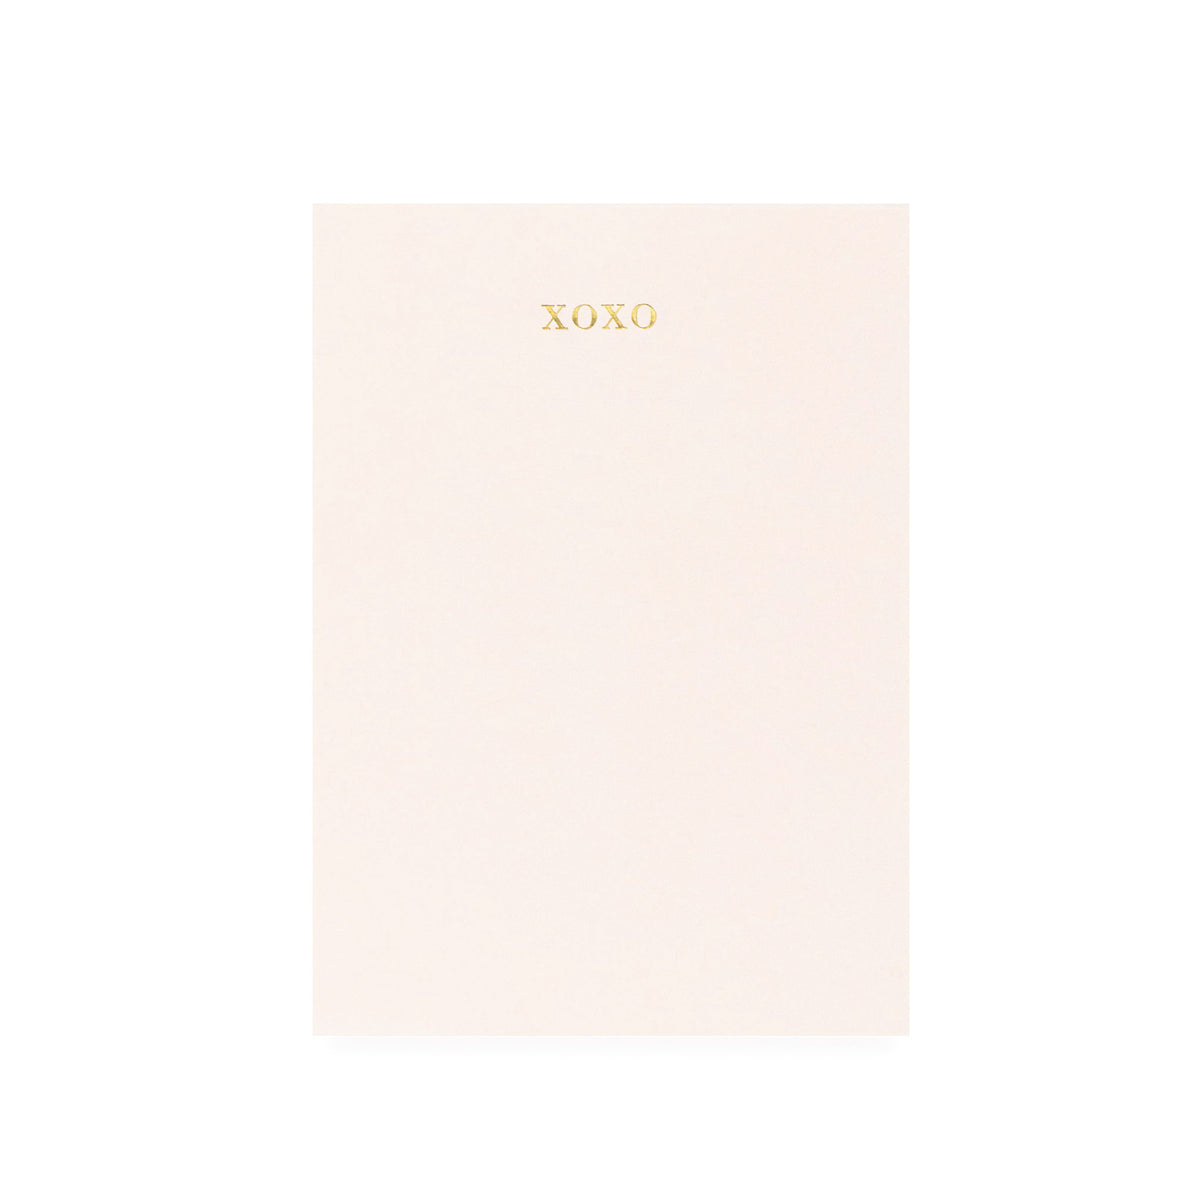 Pale pink notepad printed with gold foil xoxo